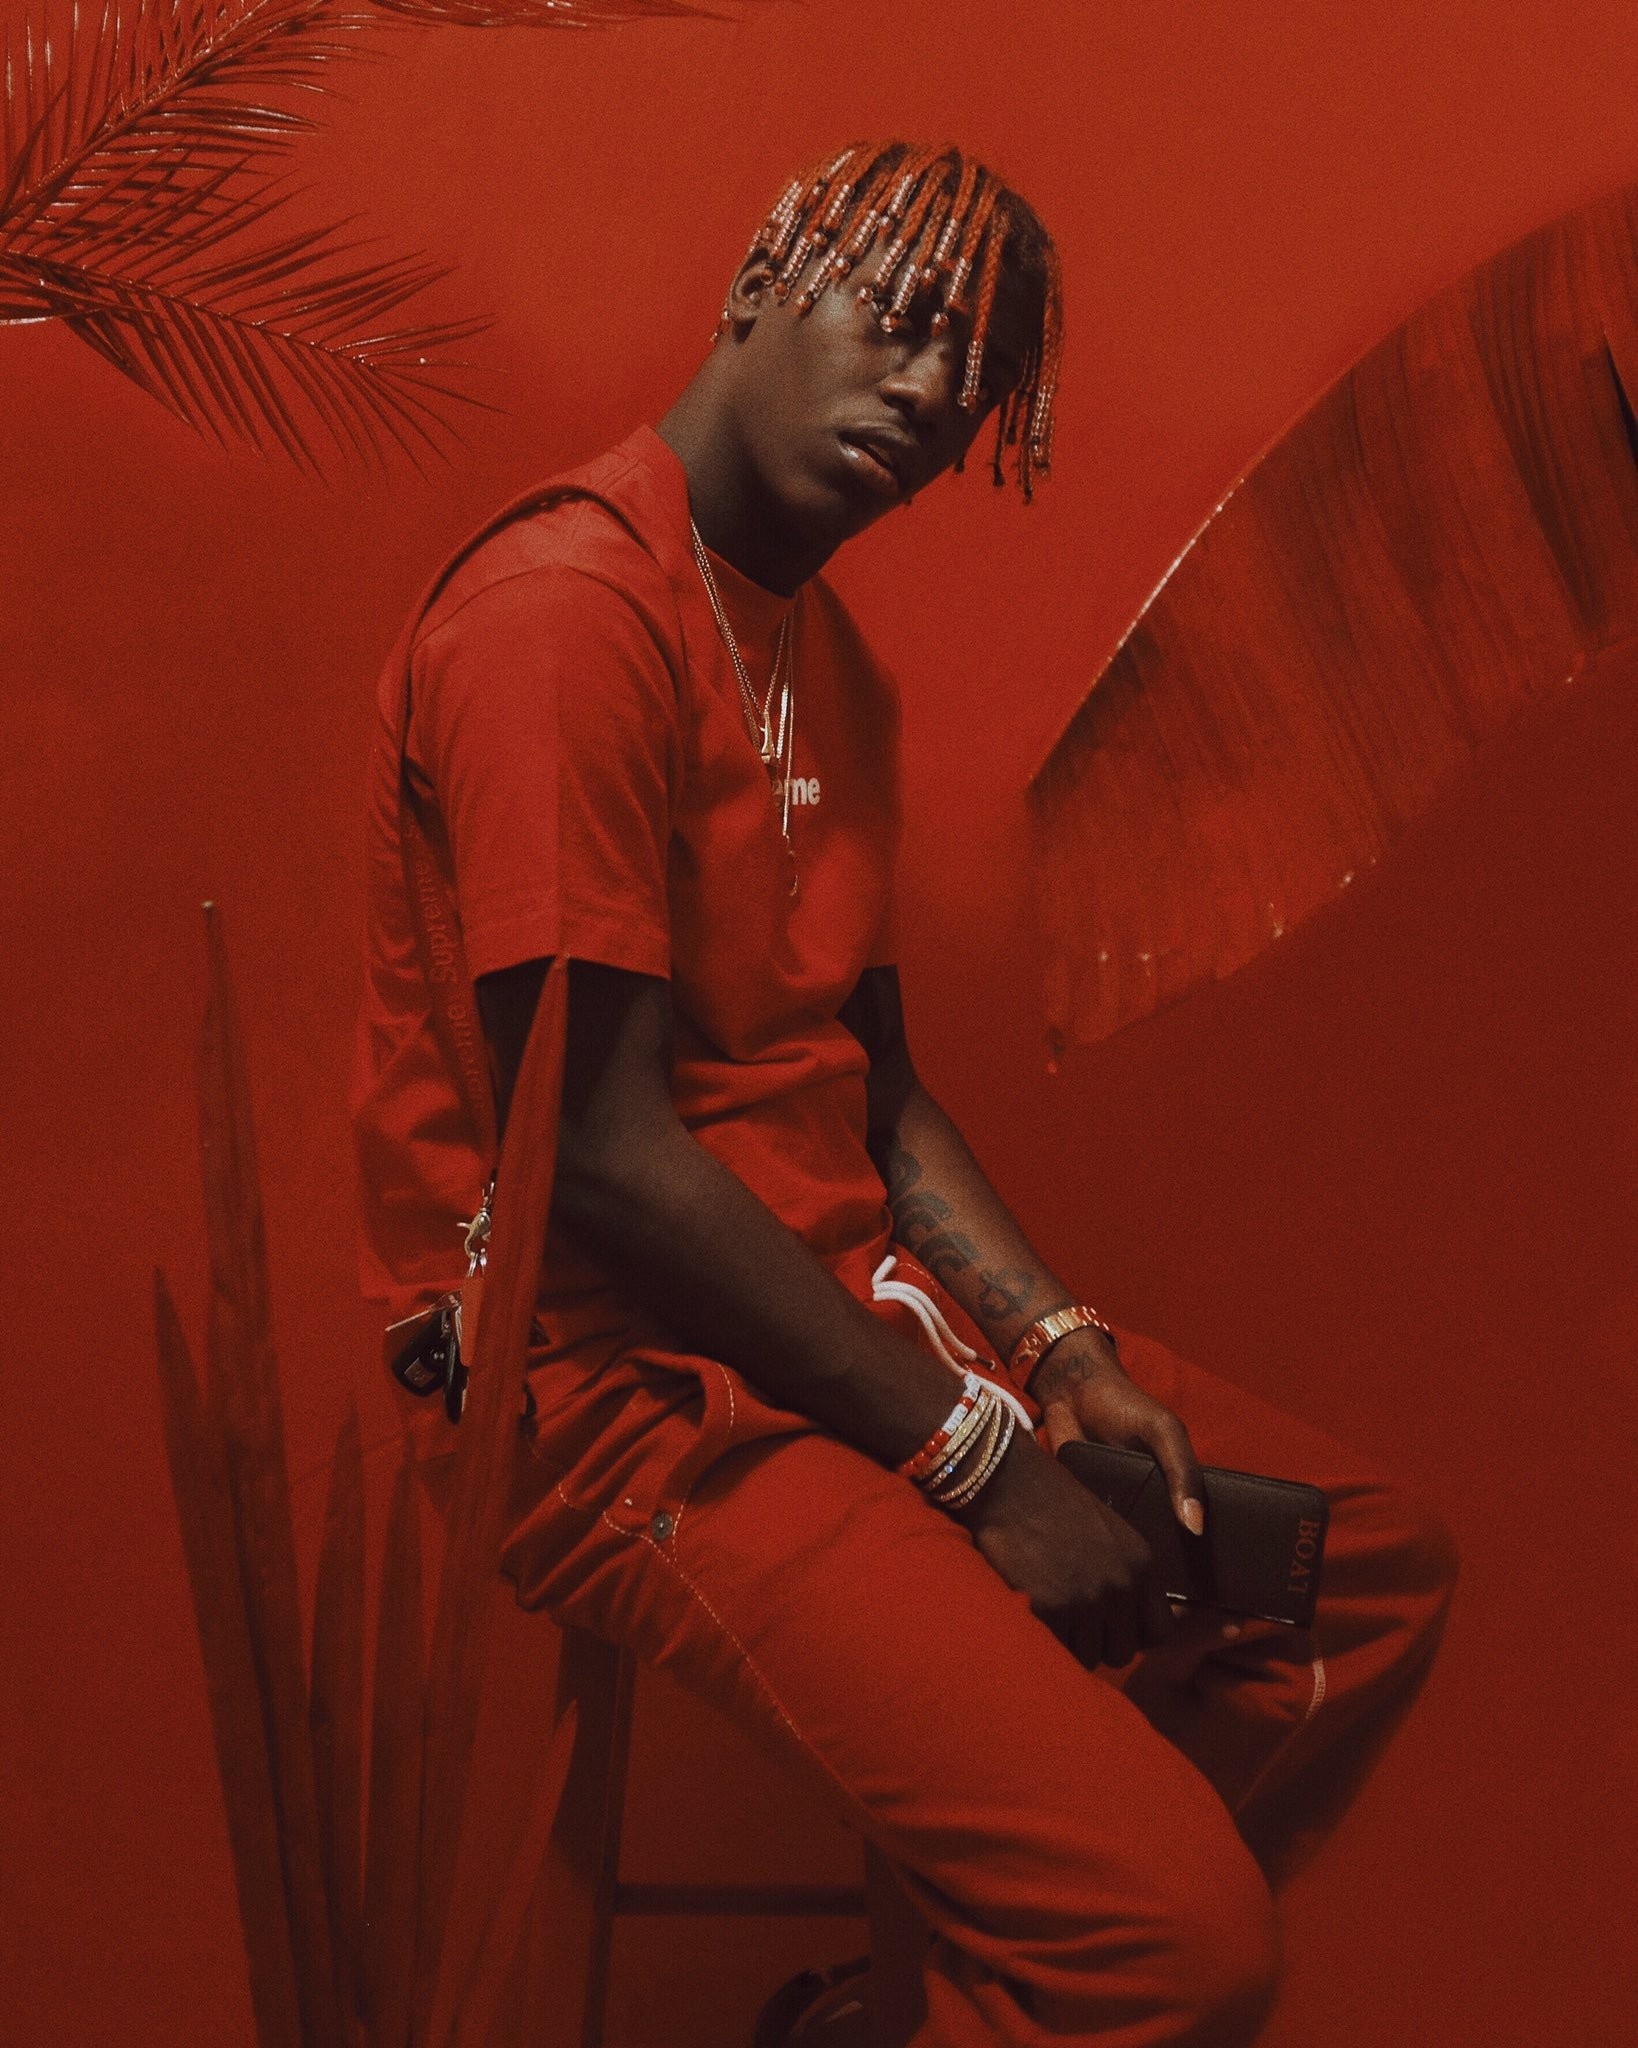 Lil Yachty, Varied wallpapers, Photo gallery, Music artist, 1640x2050 HD Handy